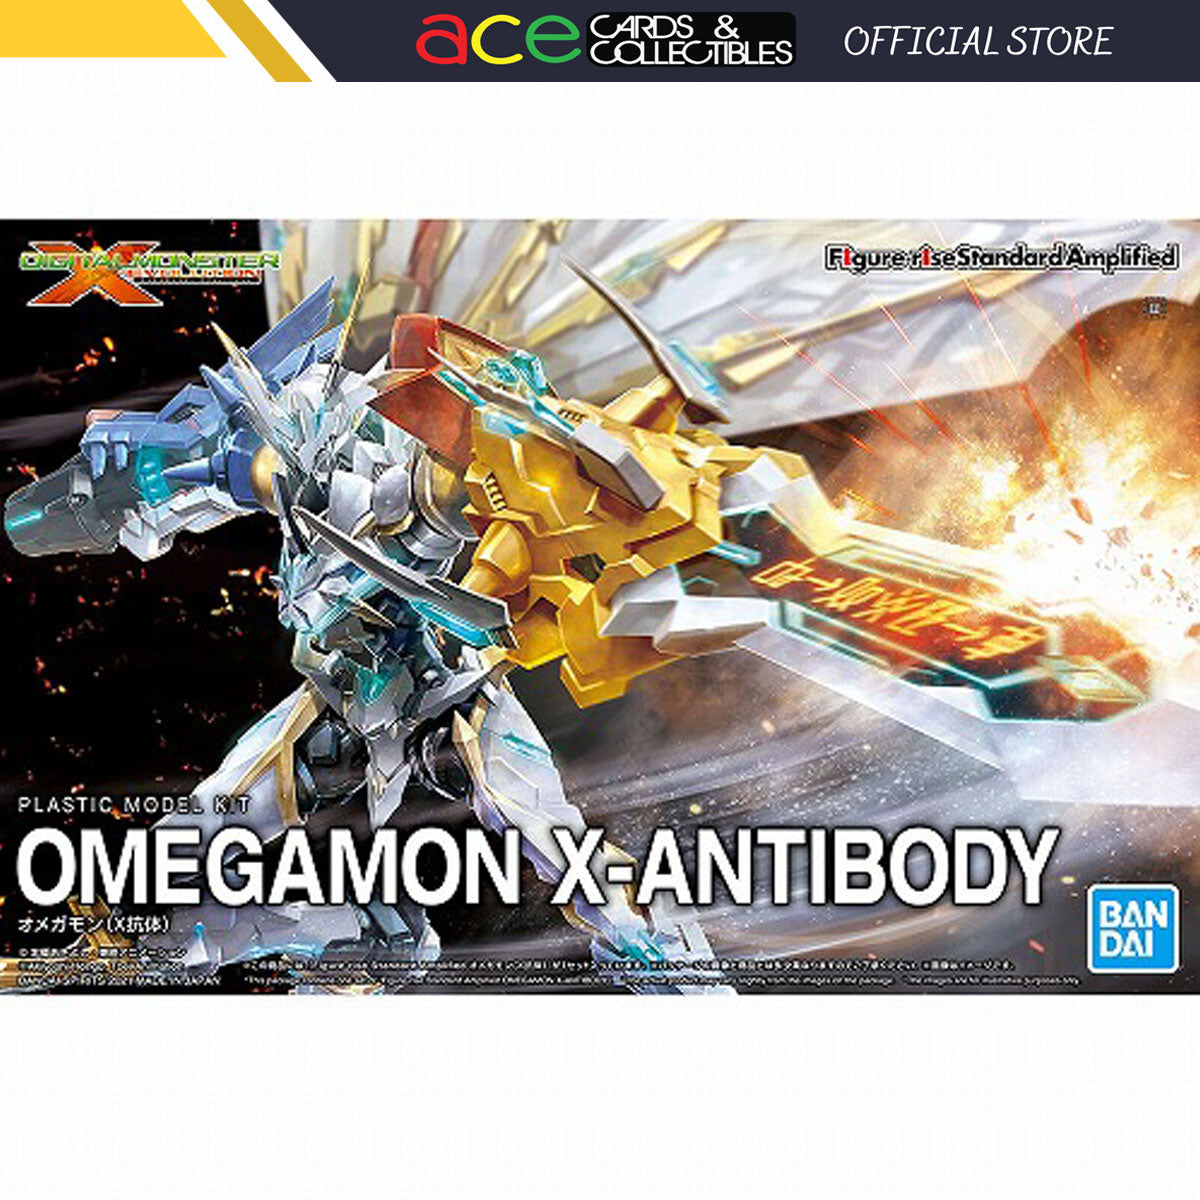 Digimon Figure-rise Standard Amplified Omegamon (X Antibody)-Bandai-Ace Cards & Collectibles